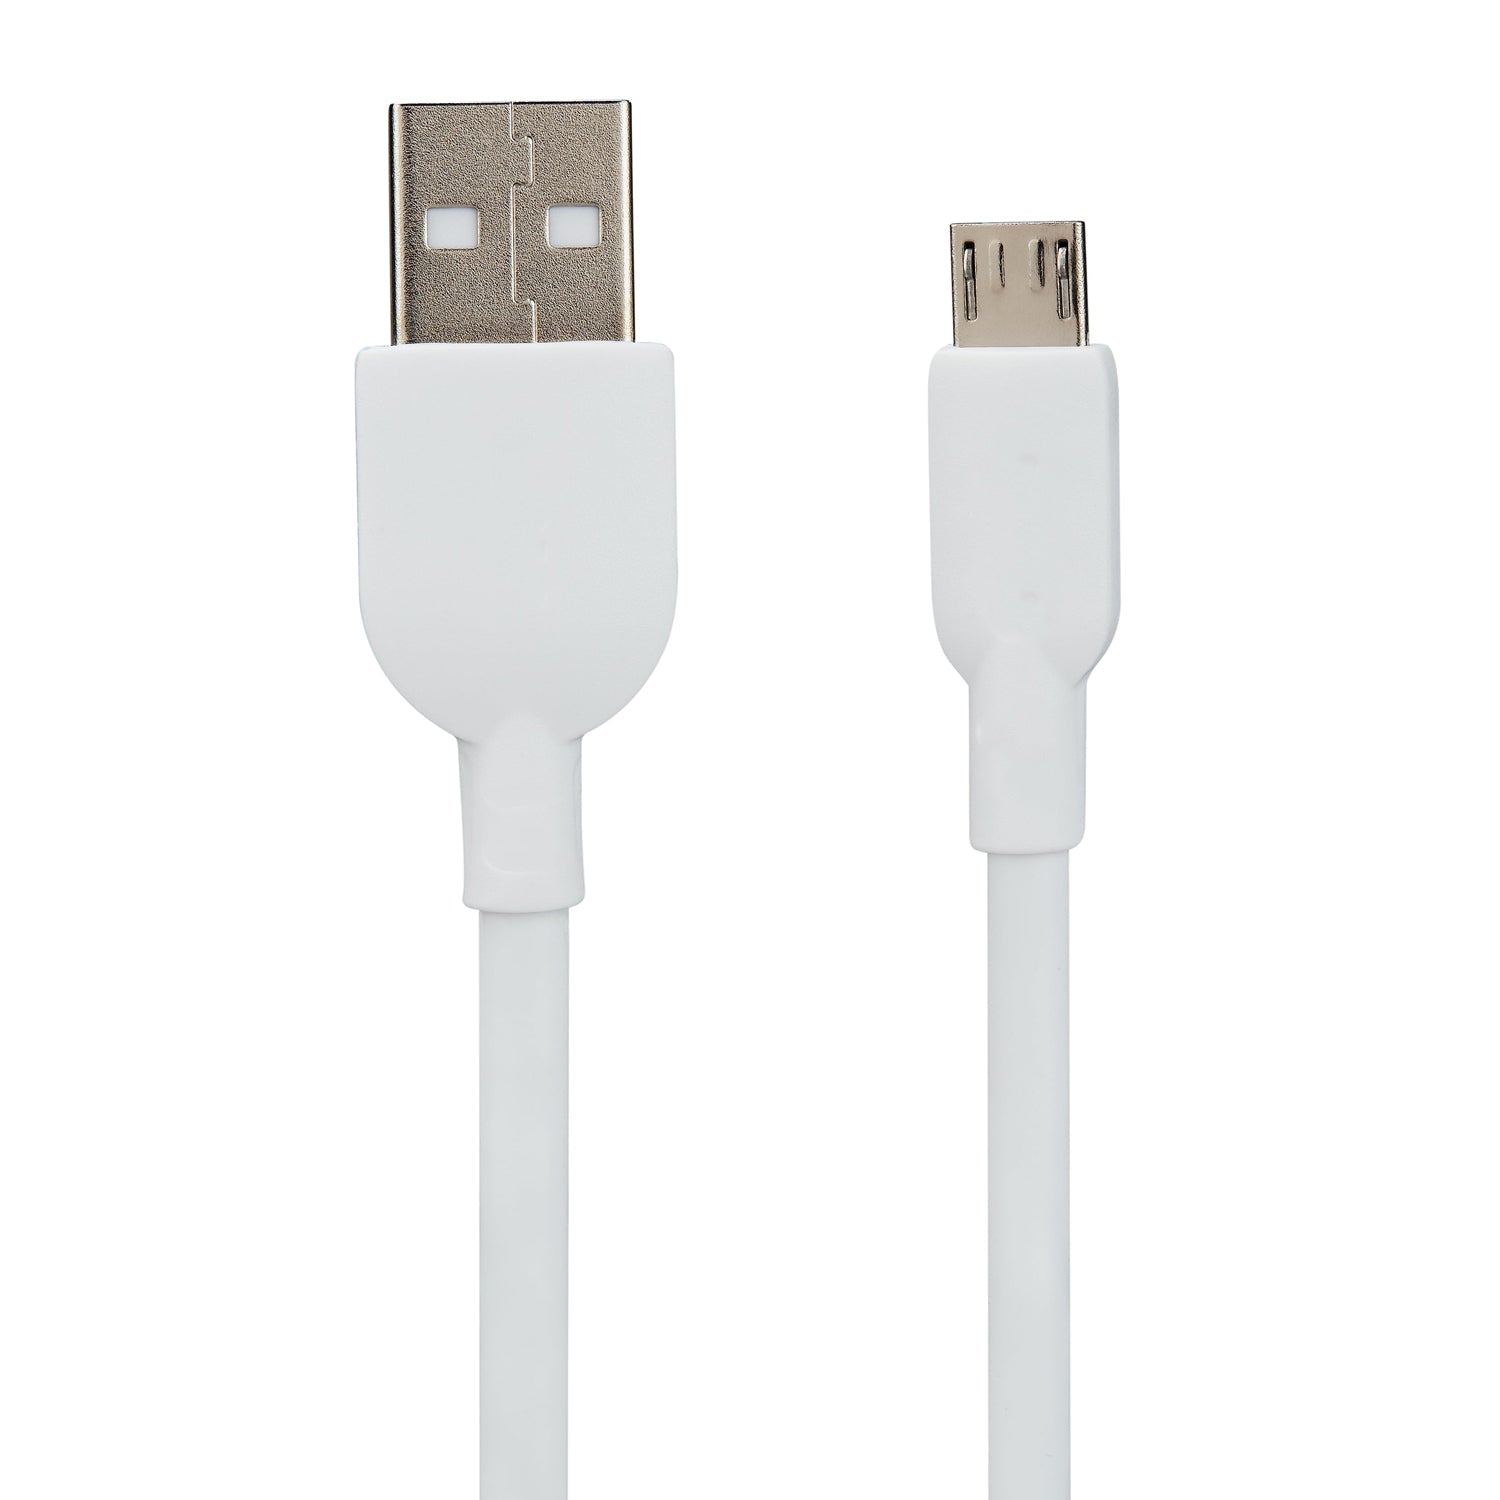 6485 Fast Charging for android & Data Transfer Extra Tough Long Micro Cable for All Compatible Smartphone and Tablets